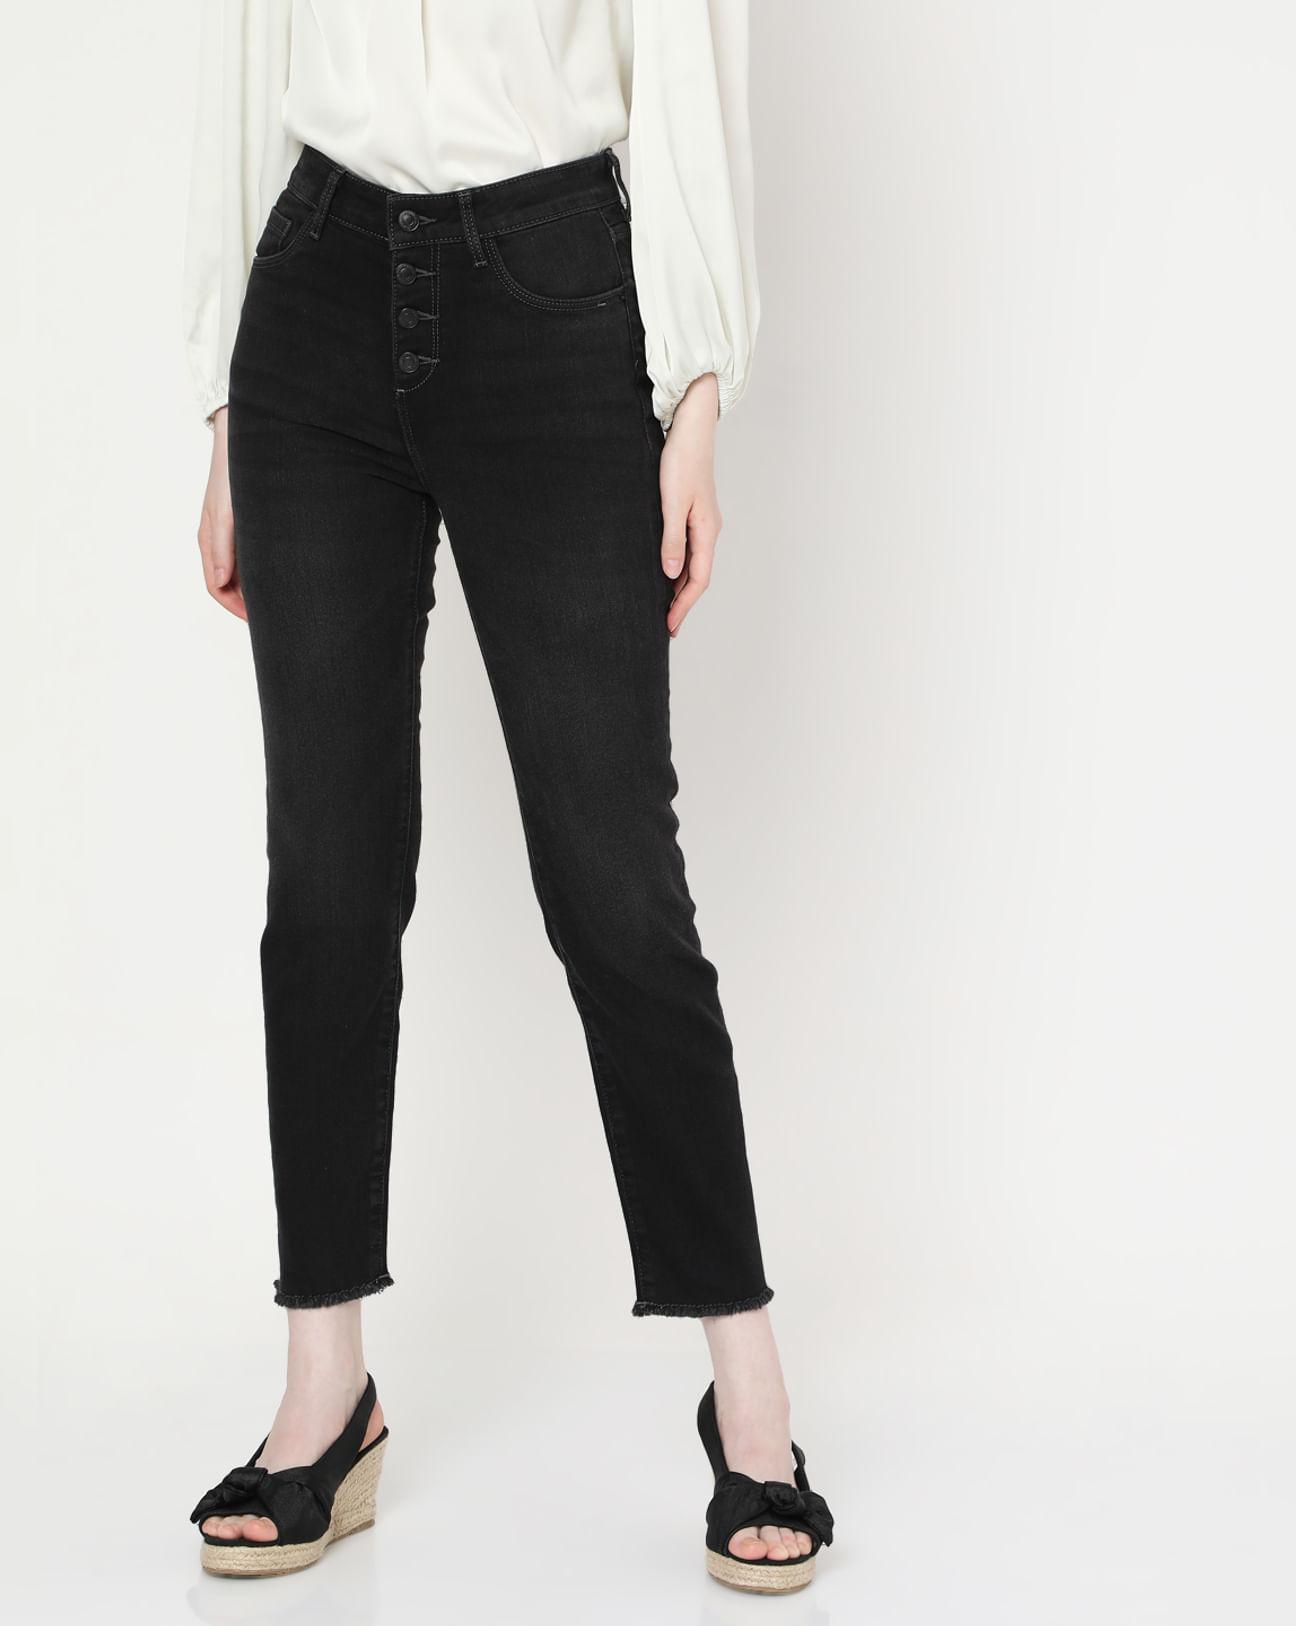 grey high rise buttoned regular fit jeans